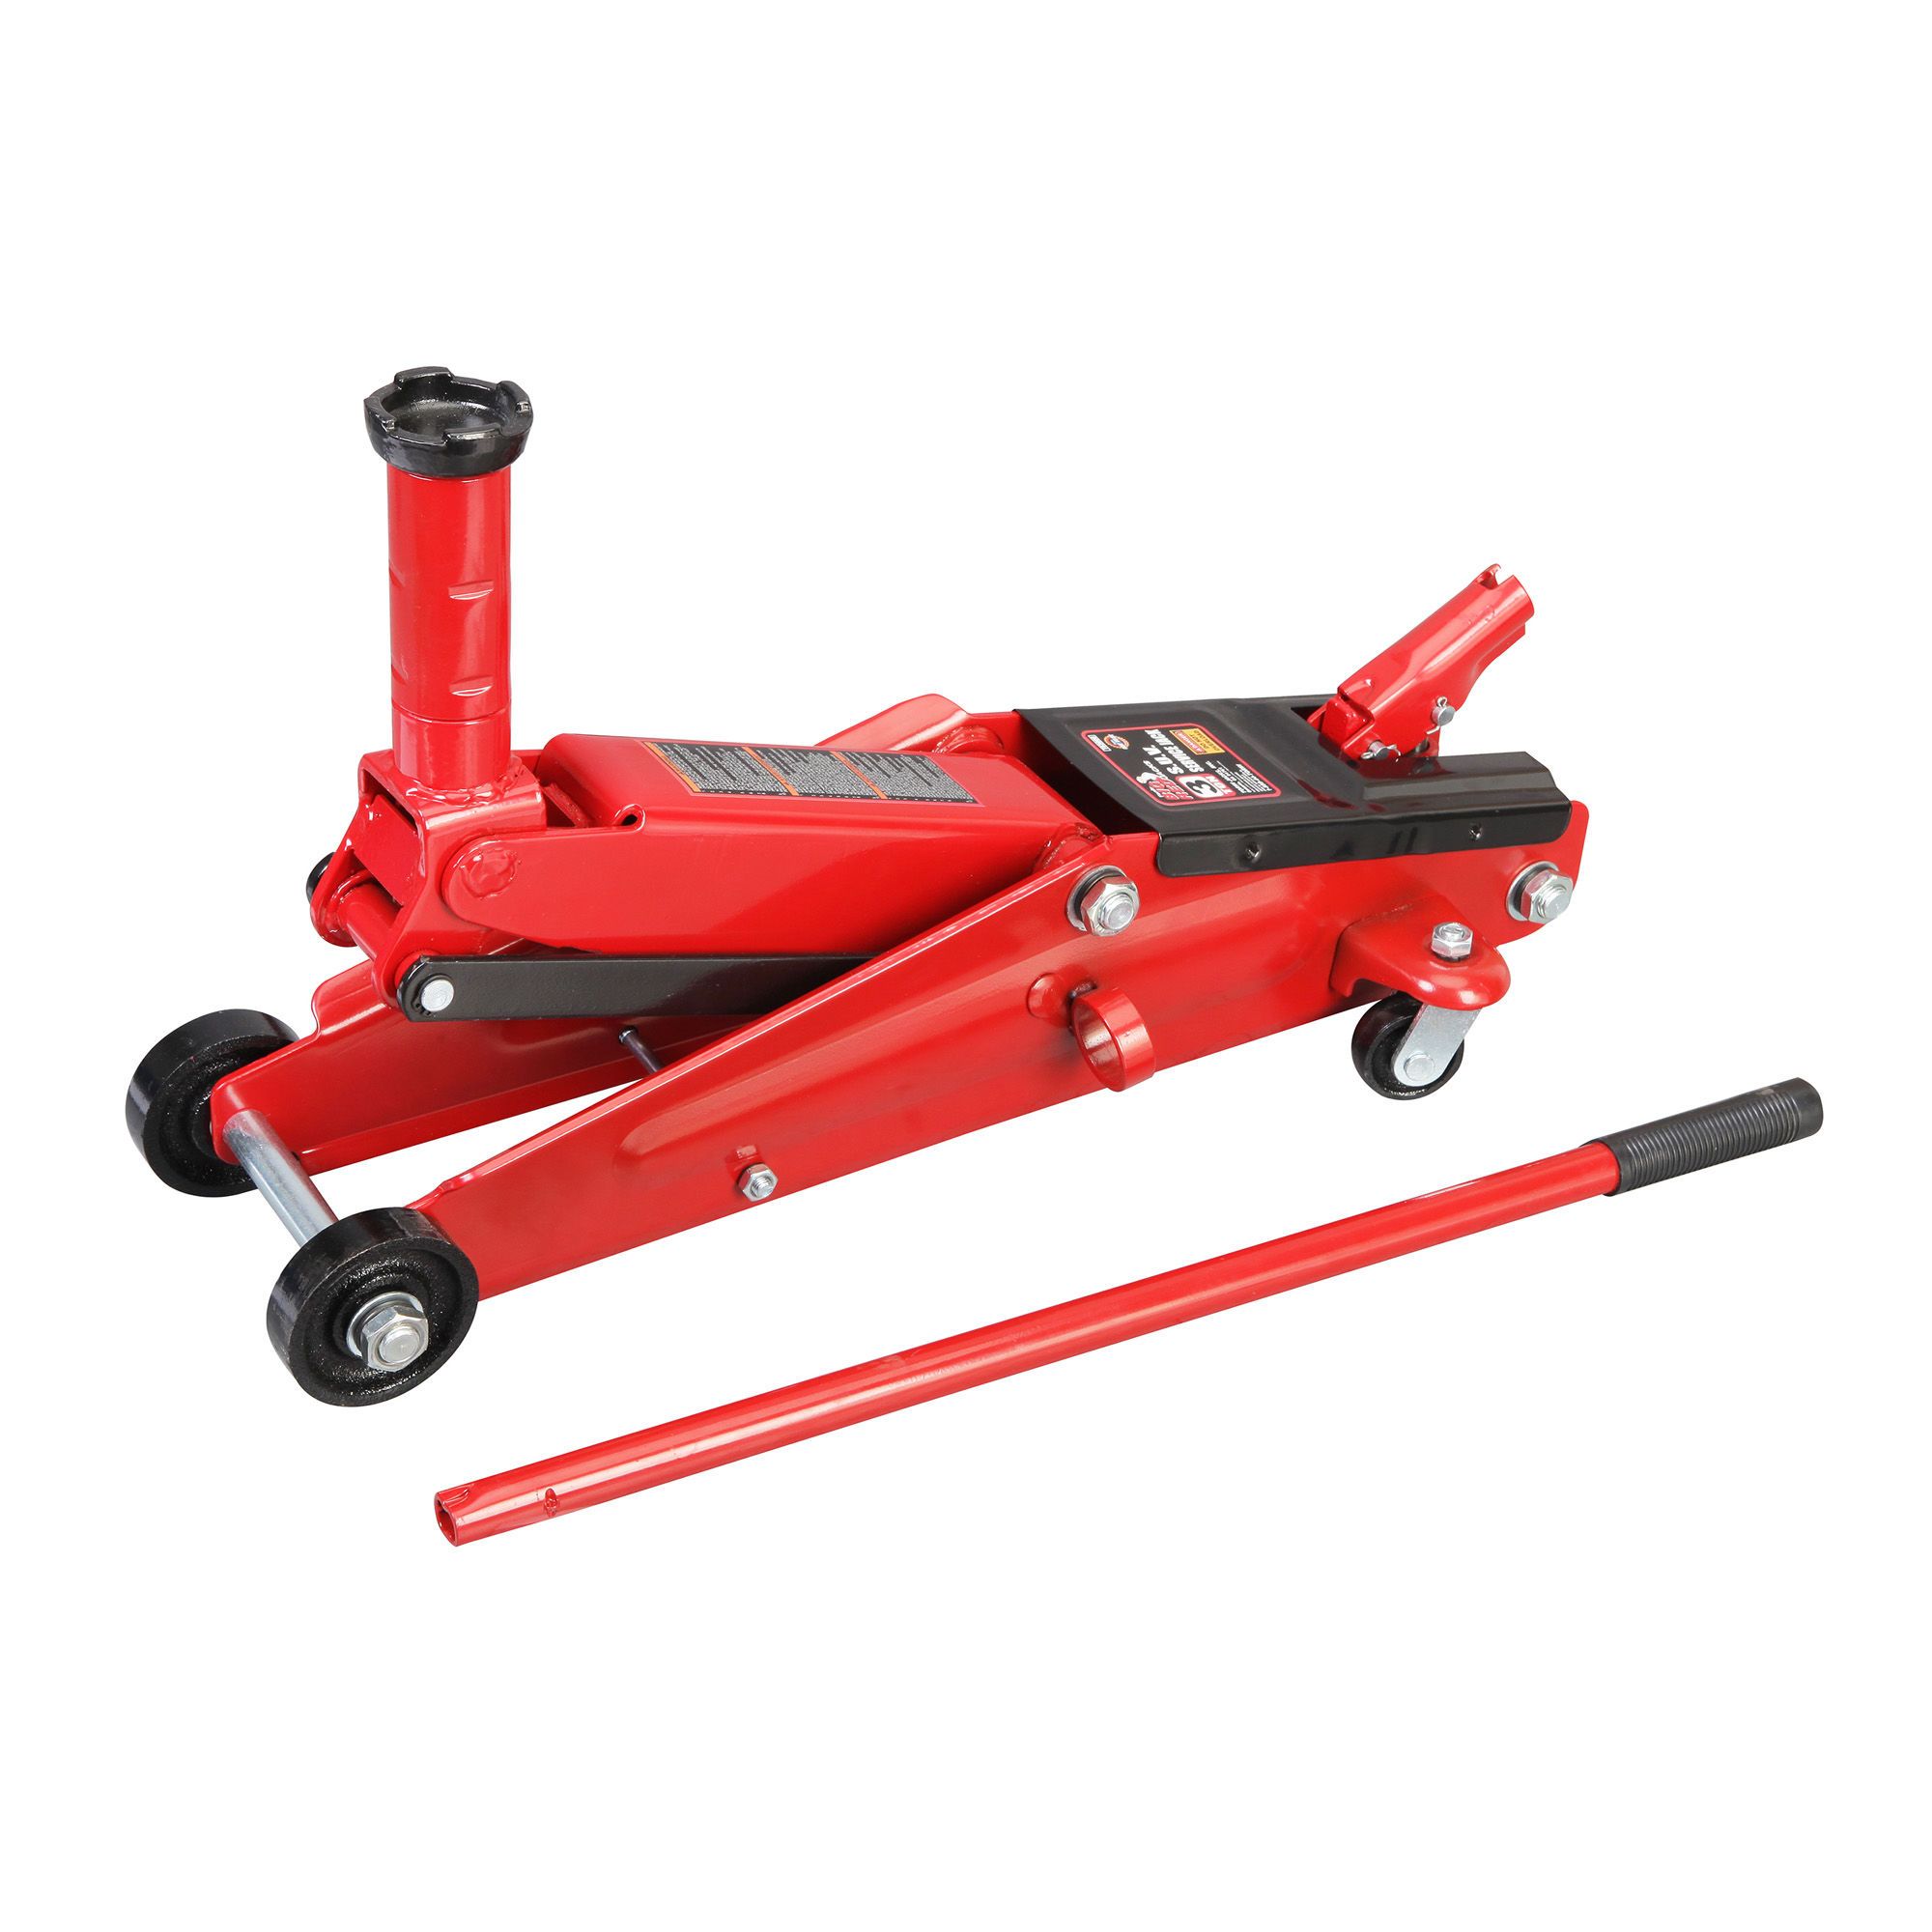 Cric hydraulique roulant 2T BIG RED